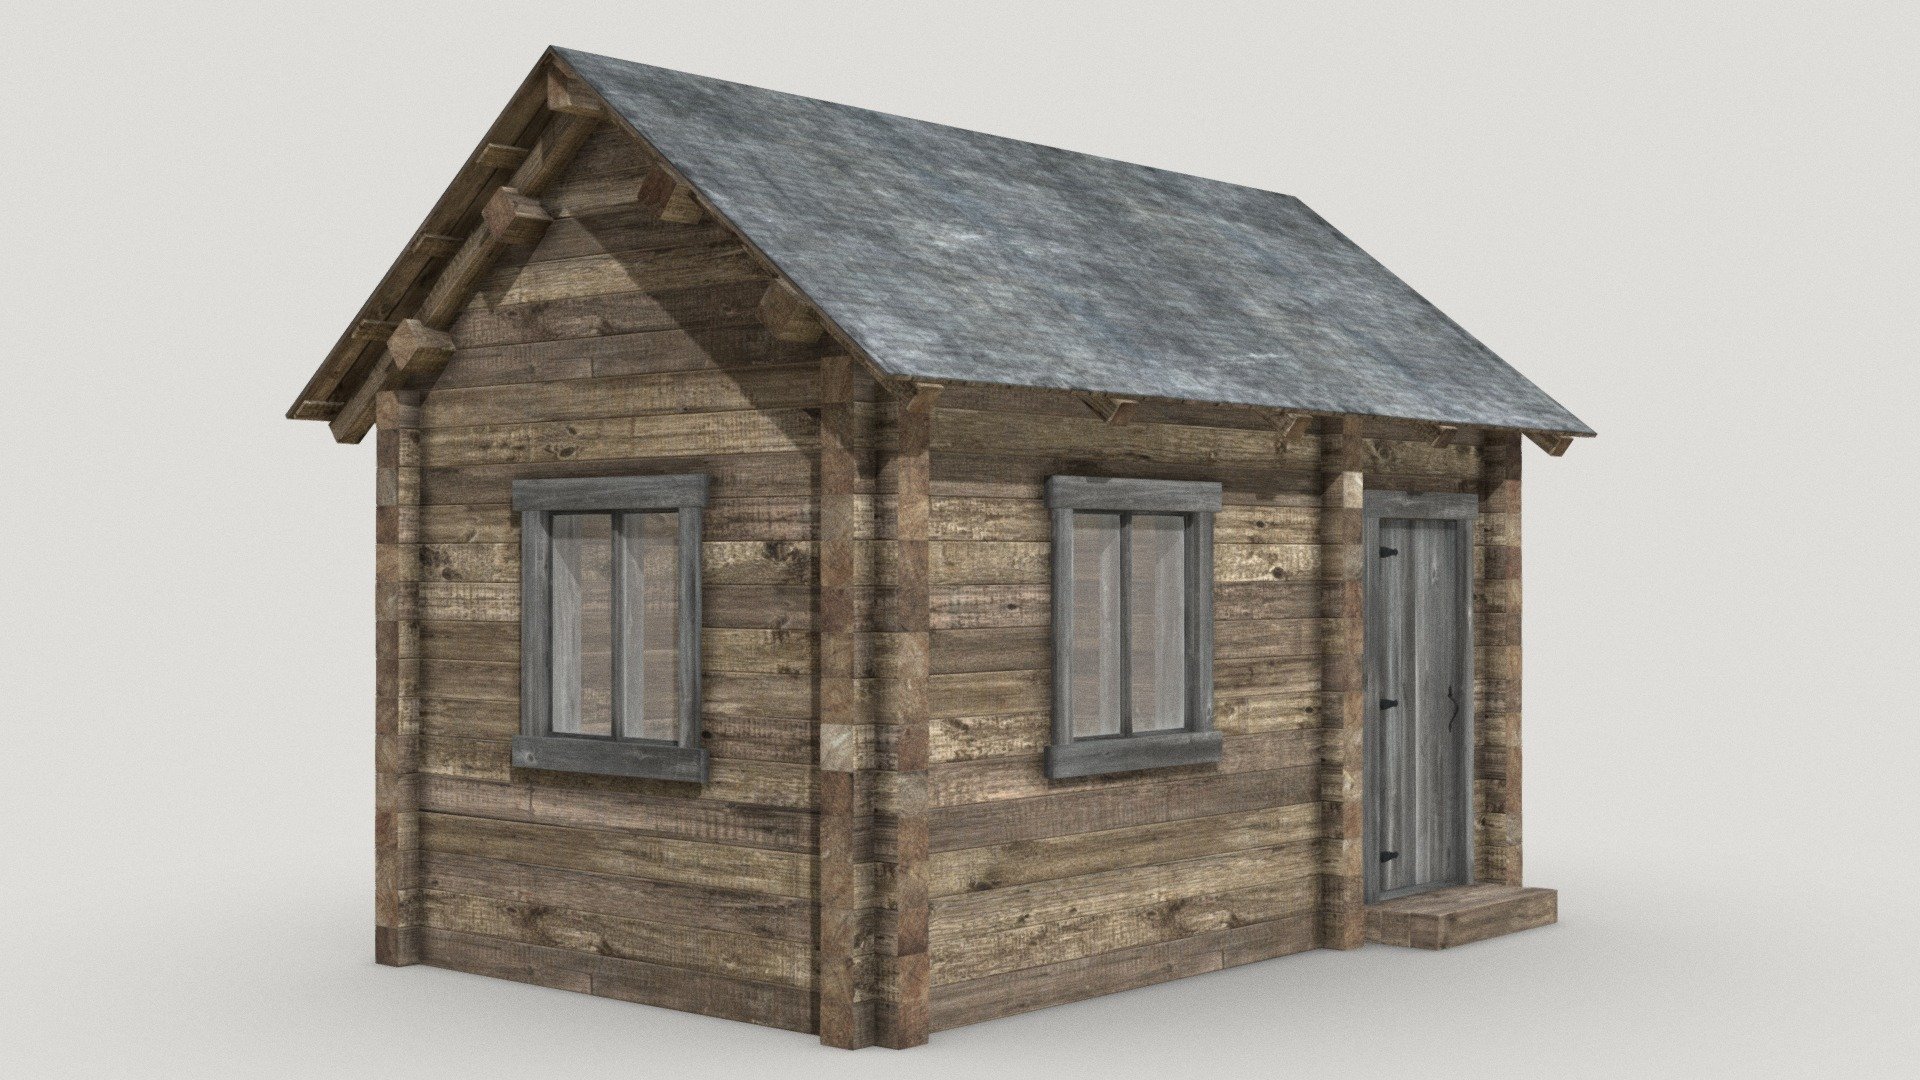 Low-poly PBR 3D model of a rustic log cabin. Ready for game engines and architectural 3D software.

The door is separate.

The model uses 6 texture sets and shared texture space (overlapping UVs).

Unity package included.

Texture format: PNG 2048x2048 to 4096x4096 - Wooden Log Cabin - 3D model by donnichols 3d model